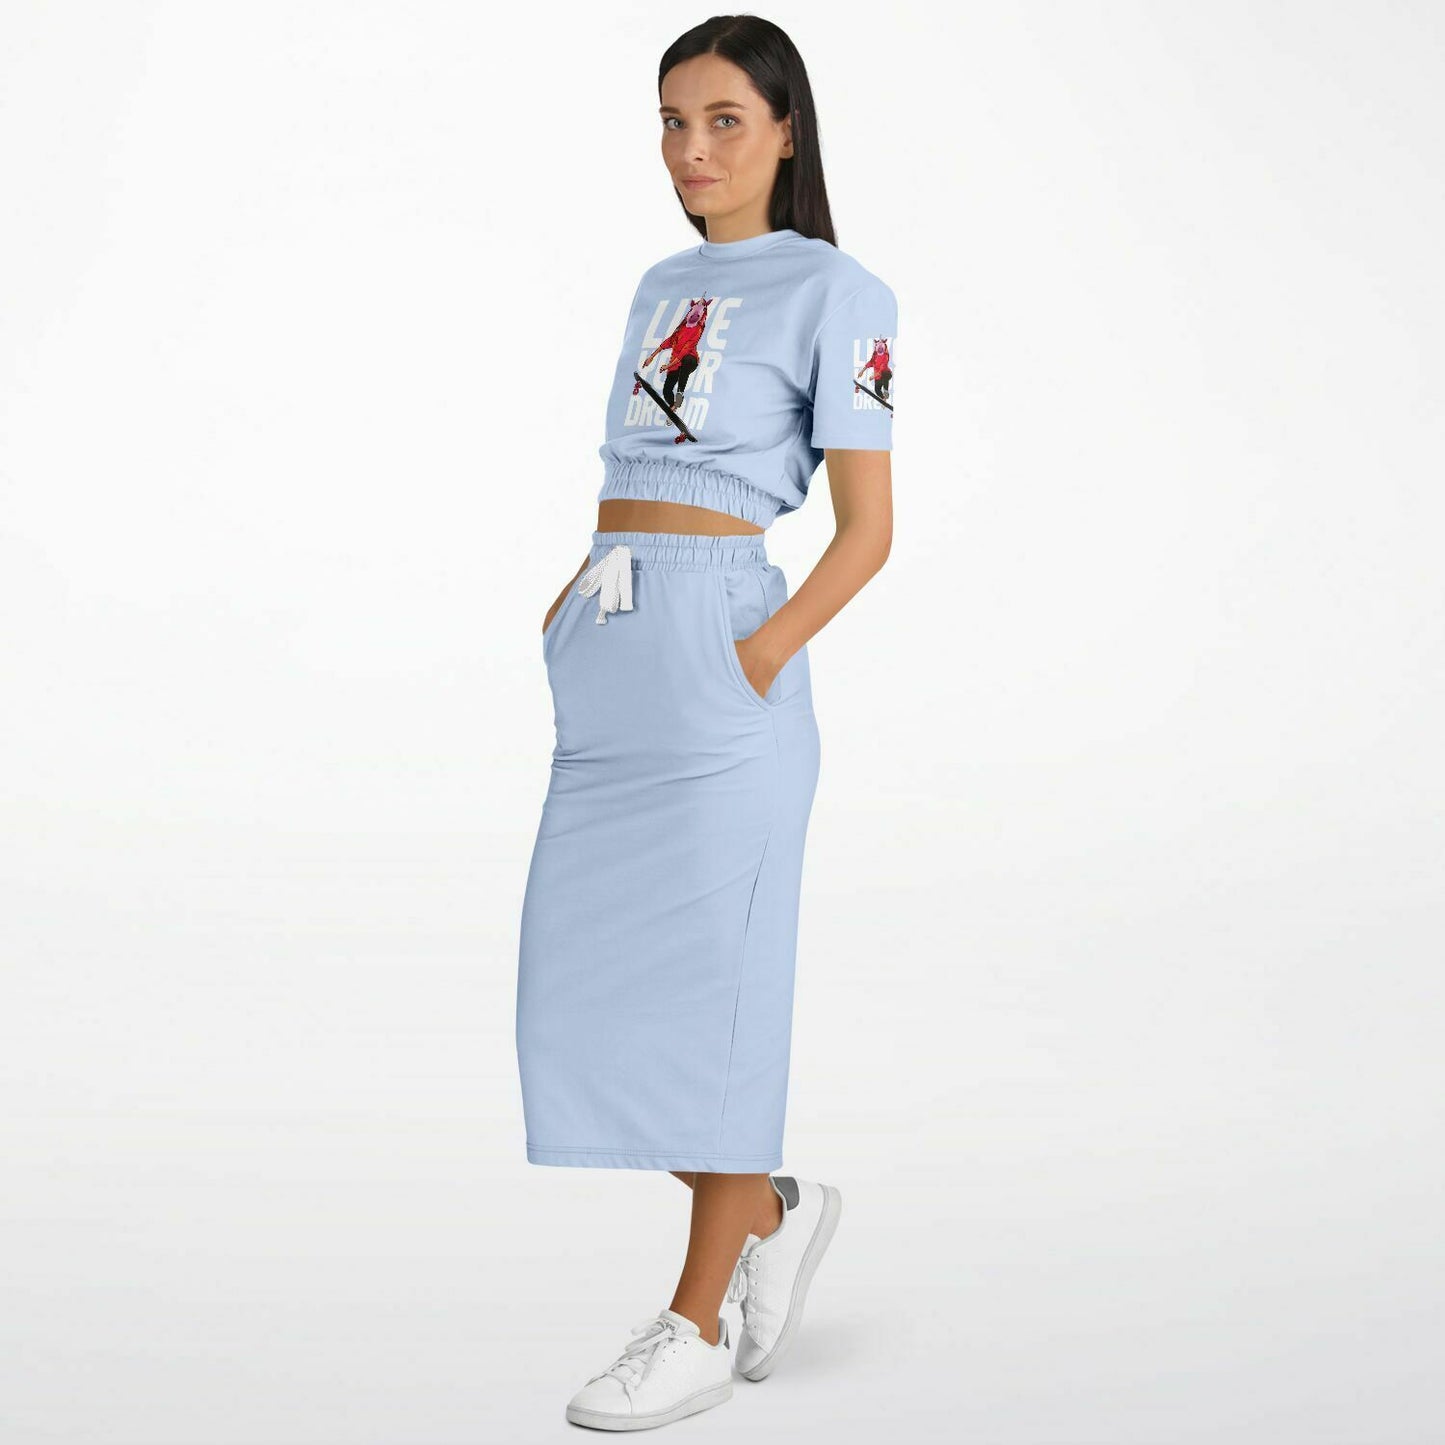 Live Your Dream Athletic Cropped Short Sleeve Sweatshirt and Long Pocket Skirt Set - AnimePhysique